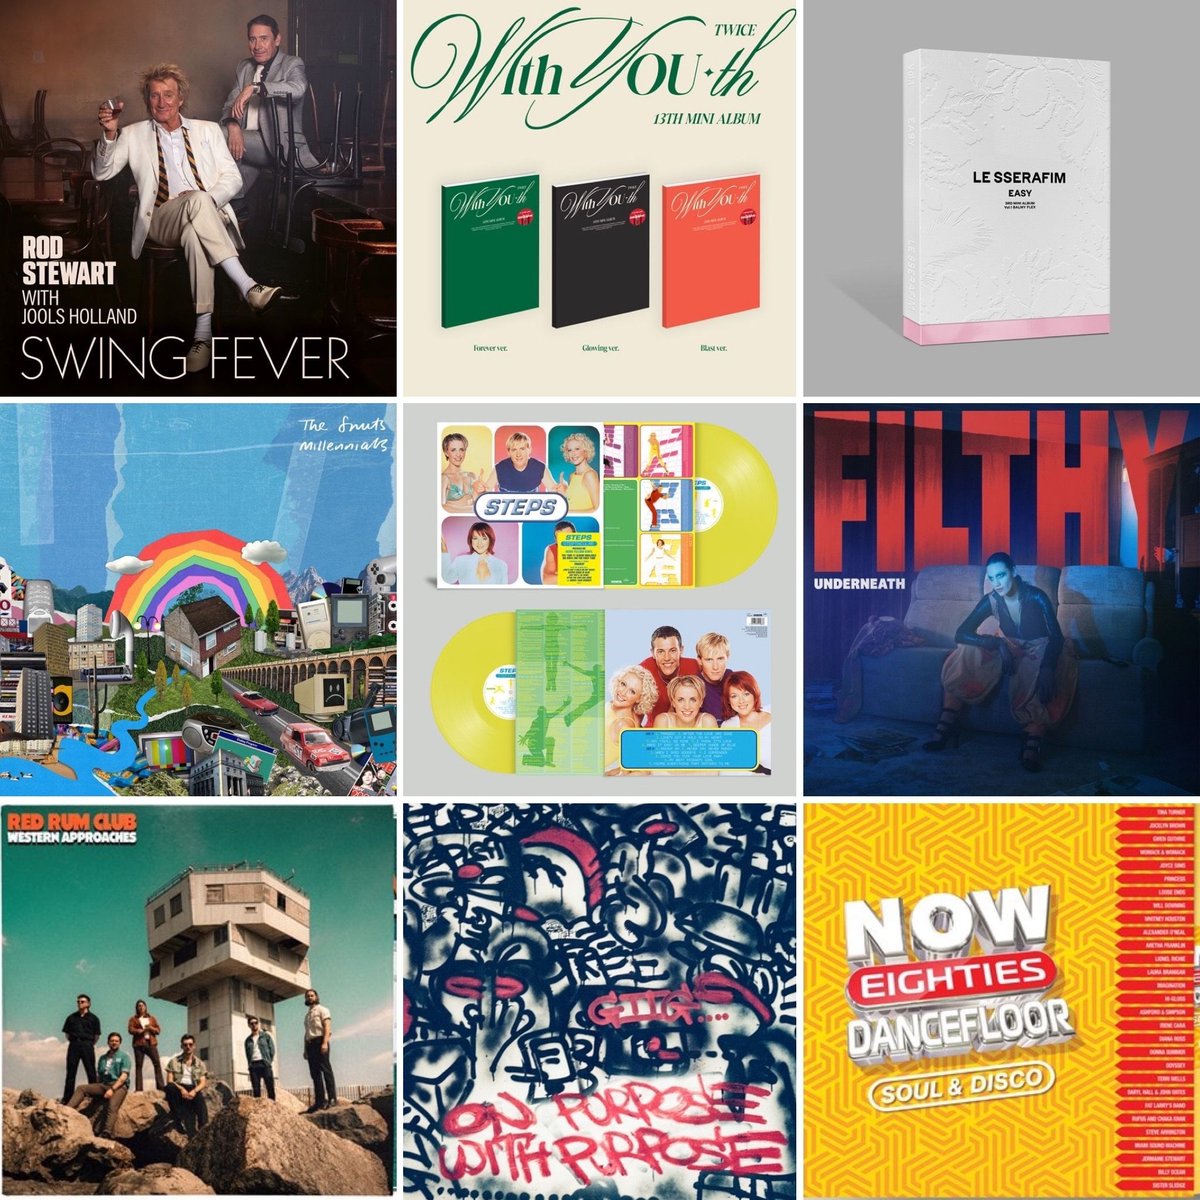 New music Friday…the big album this week @rodstewart with @JoolsBand “Swing Fever”, we’ll be getting our boogie woogie on. . K-Pop #hmvExclusive @JYPETWICE and @le_sserafim . A welcome return for @nadineshah @TheSnuts @THEREALGHETTS @OfficialSteps vinyl @NOWMusic @RedRumClub